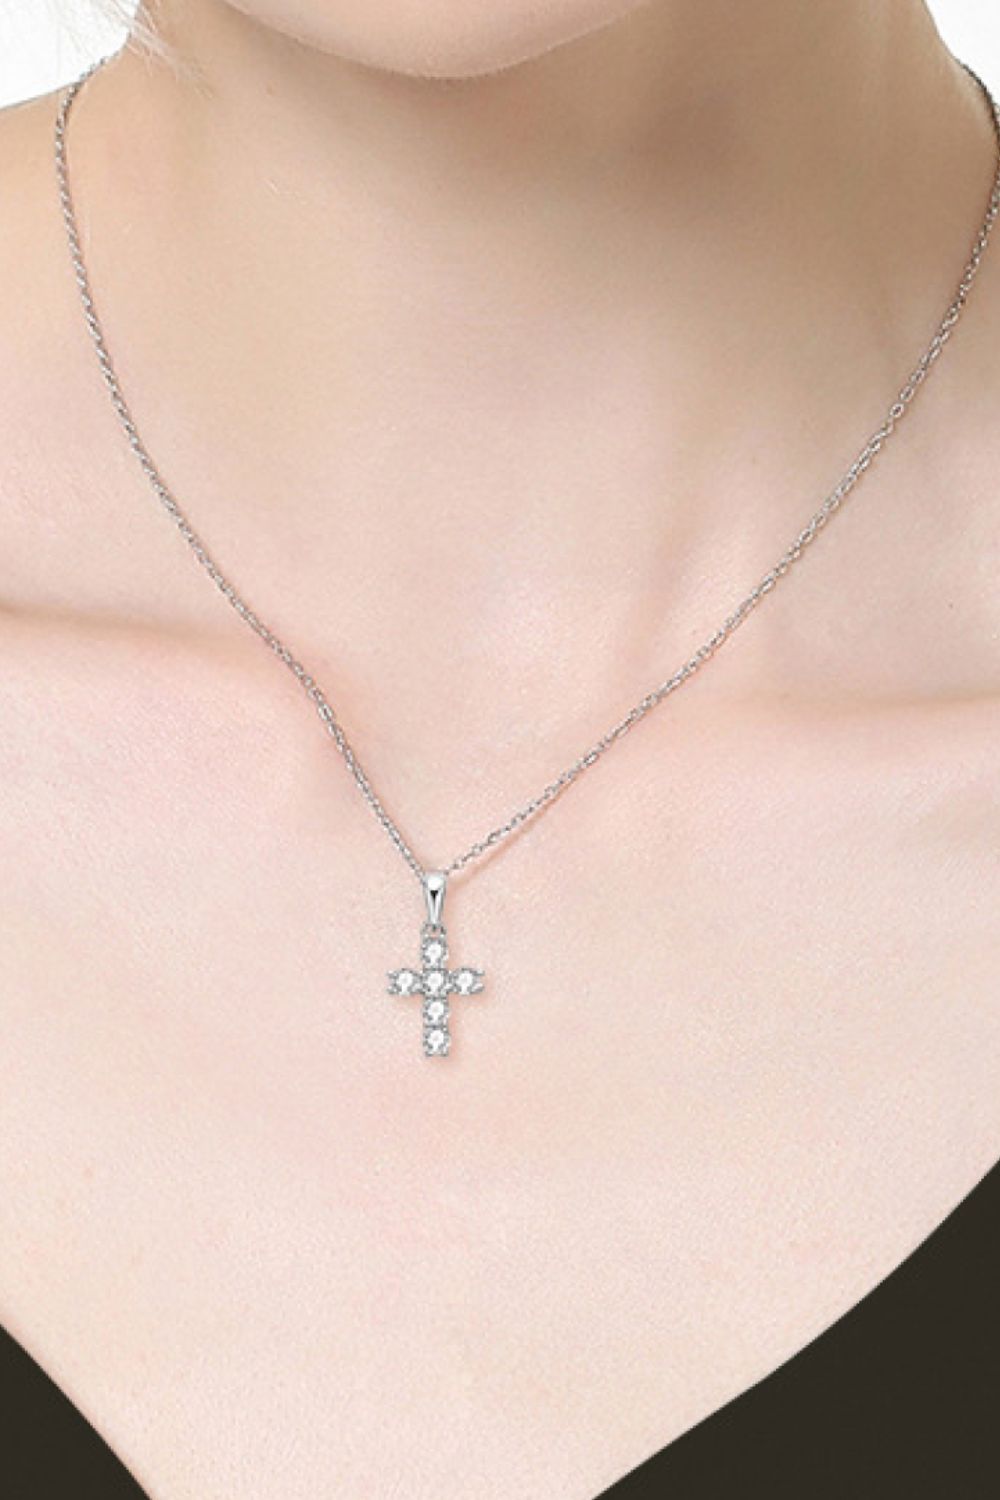 .6 Carats ctw 925 Sterling Silver Cross Moissanite Pendant Necklace Ti Amo I love you